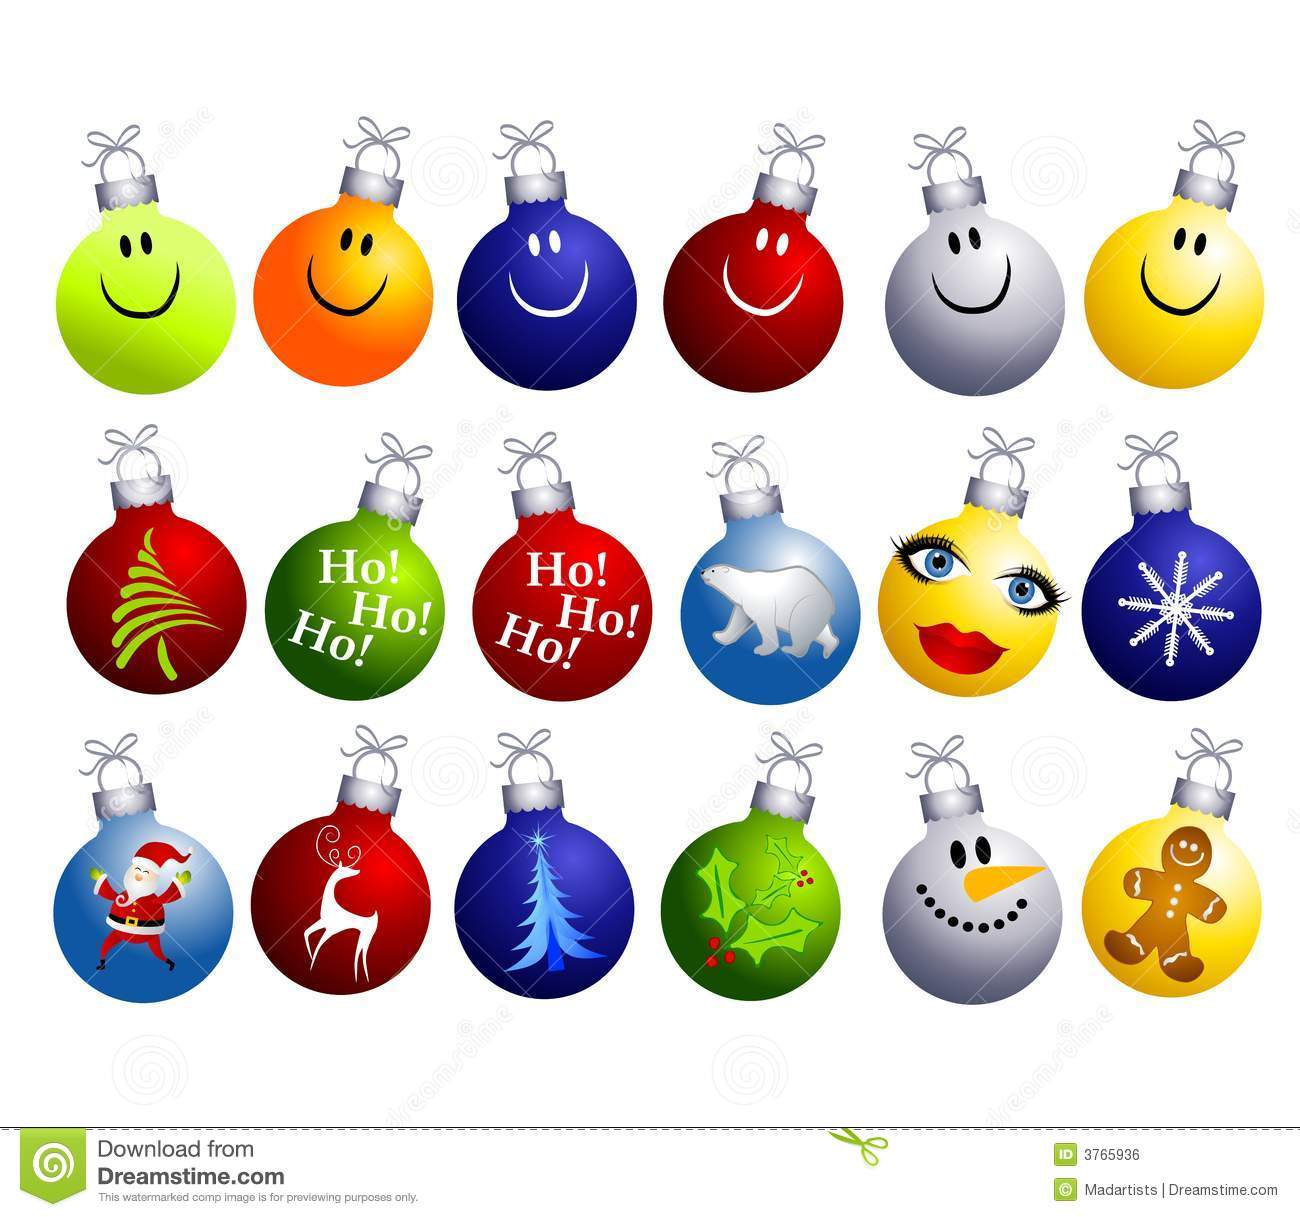 Assorted Christmas Ornaments Clip Art Royalty Free Stock Image   Image